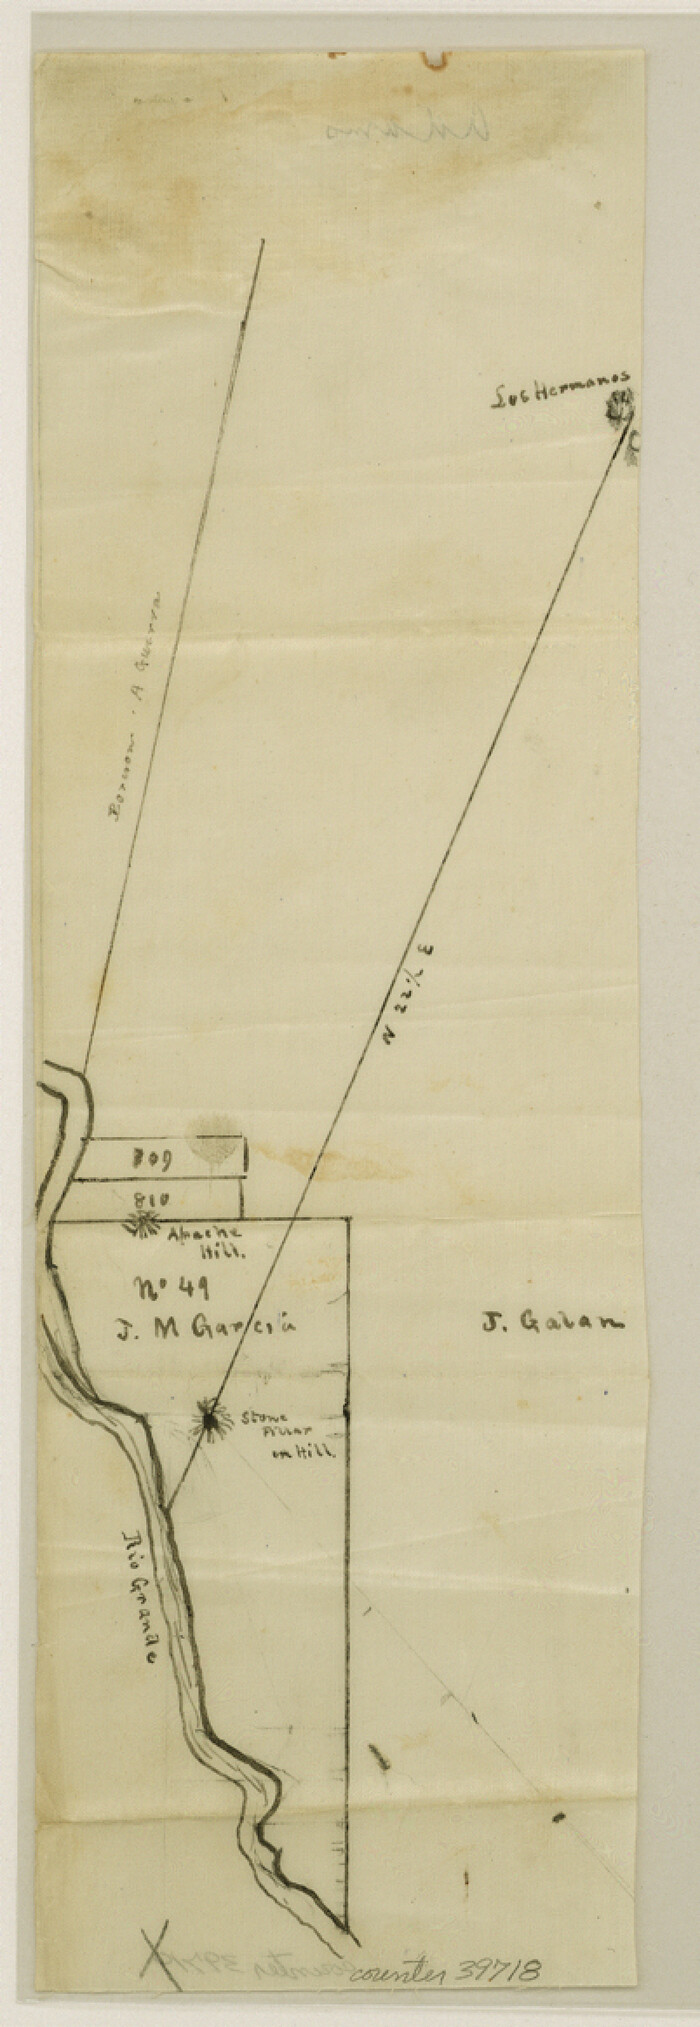 39718, Webb County Sketch File 4a, General Map Collection